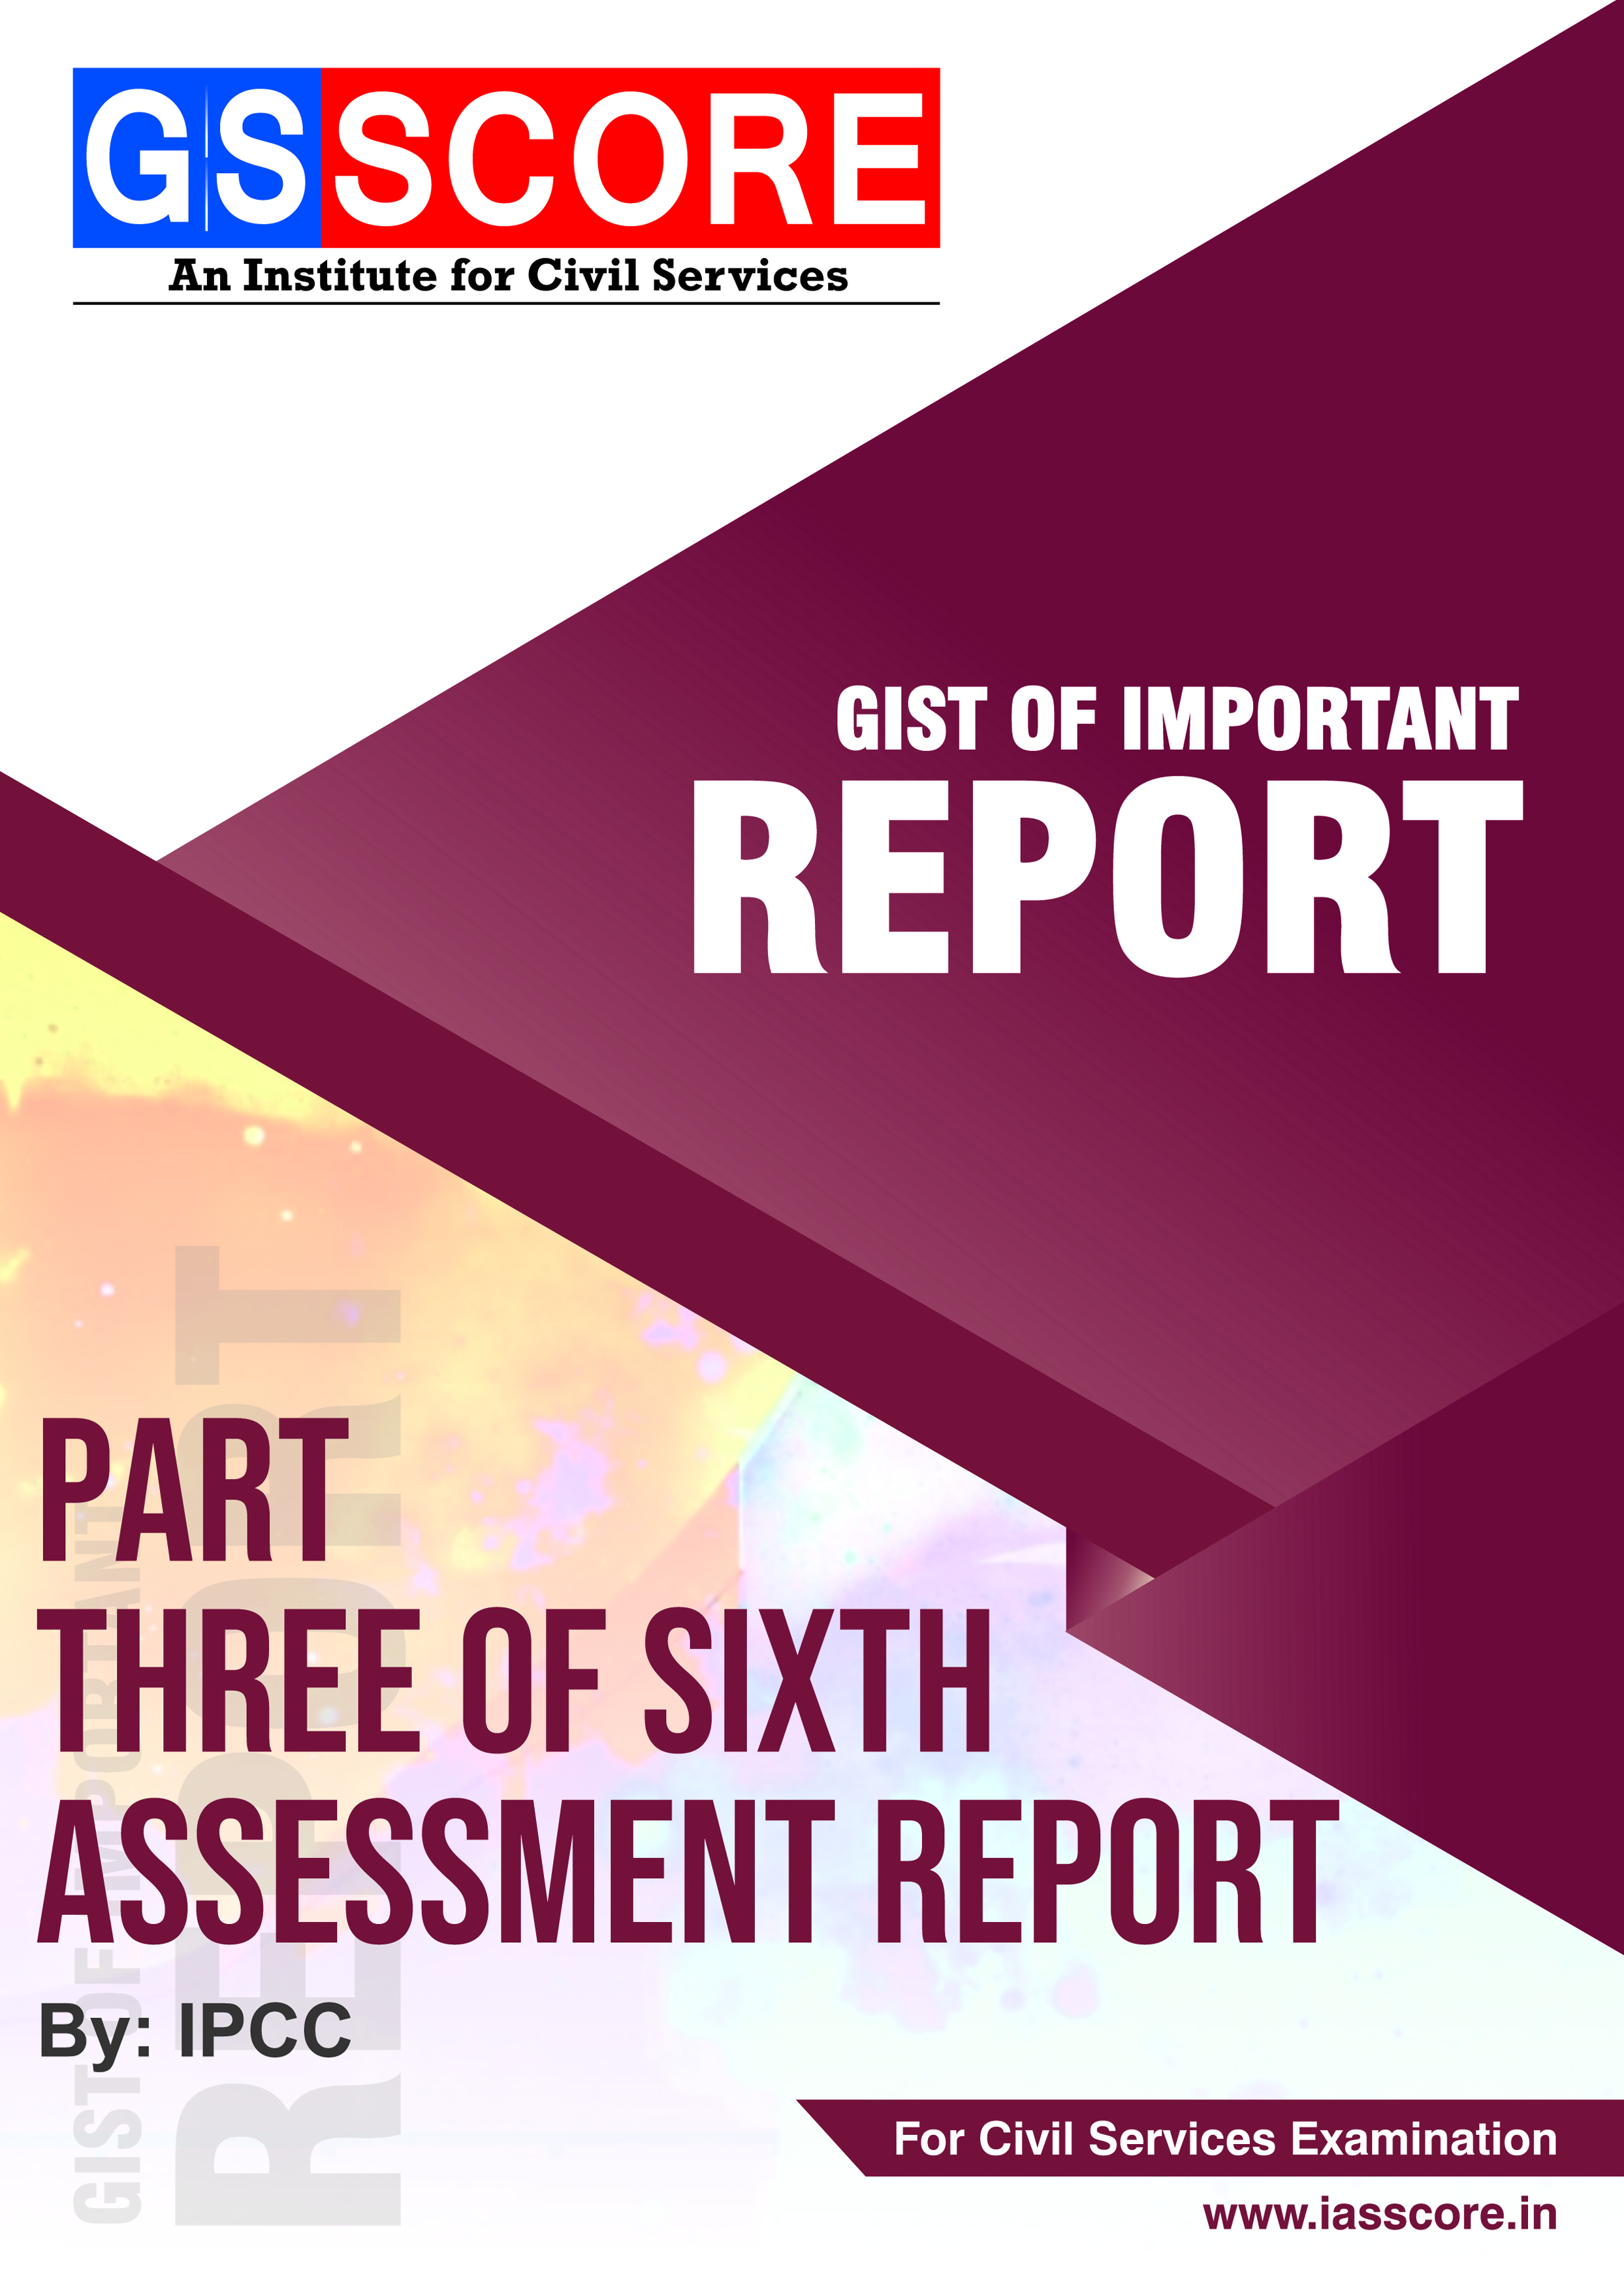 Gist of Report: Part III: Sixth Assessment Report